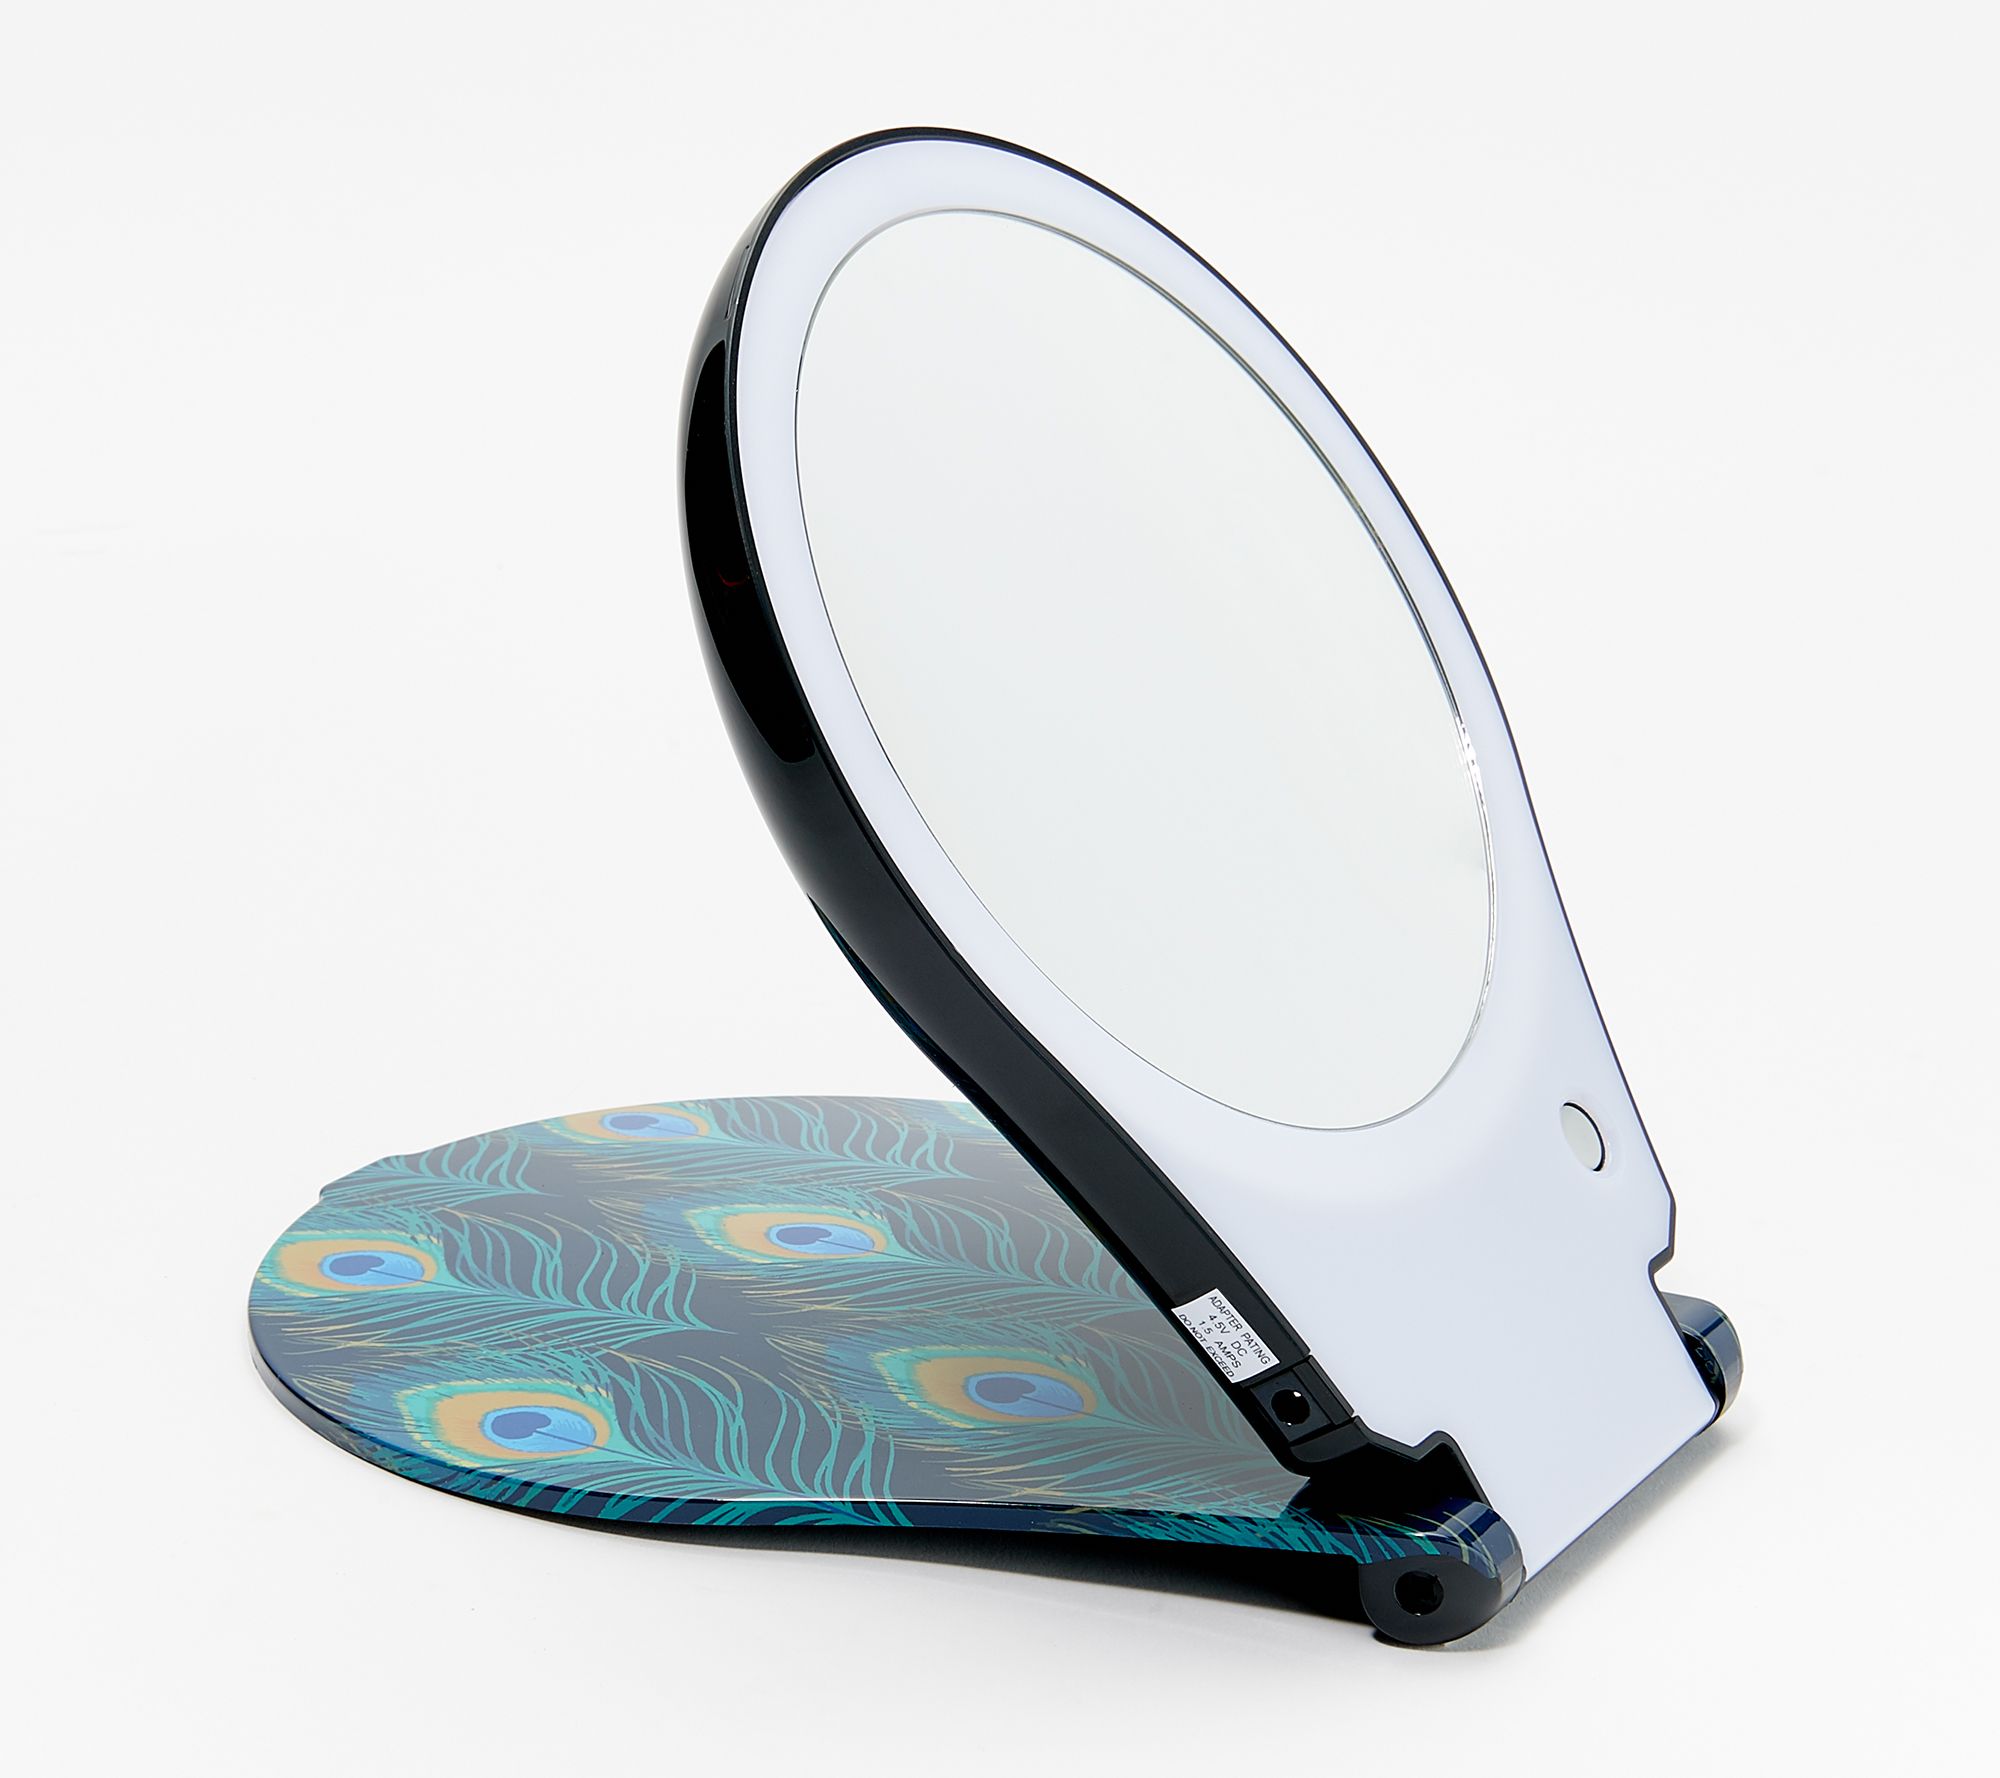 5x magnifying travel mirror with light